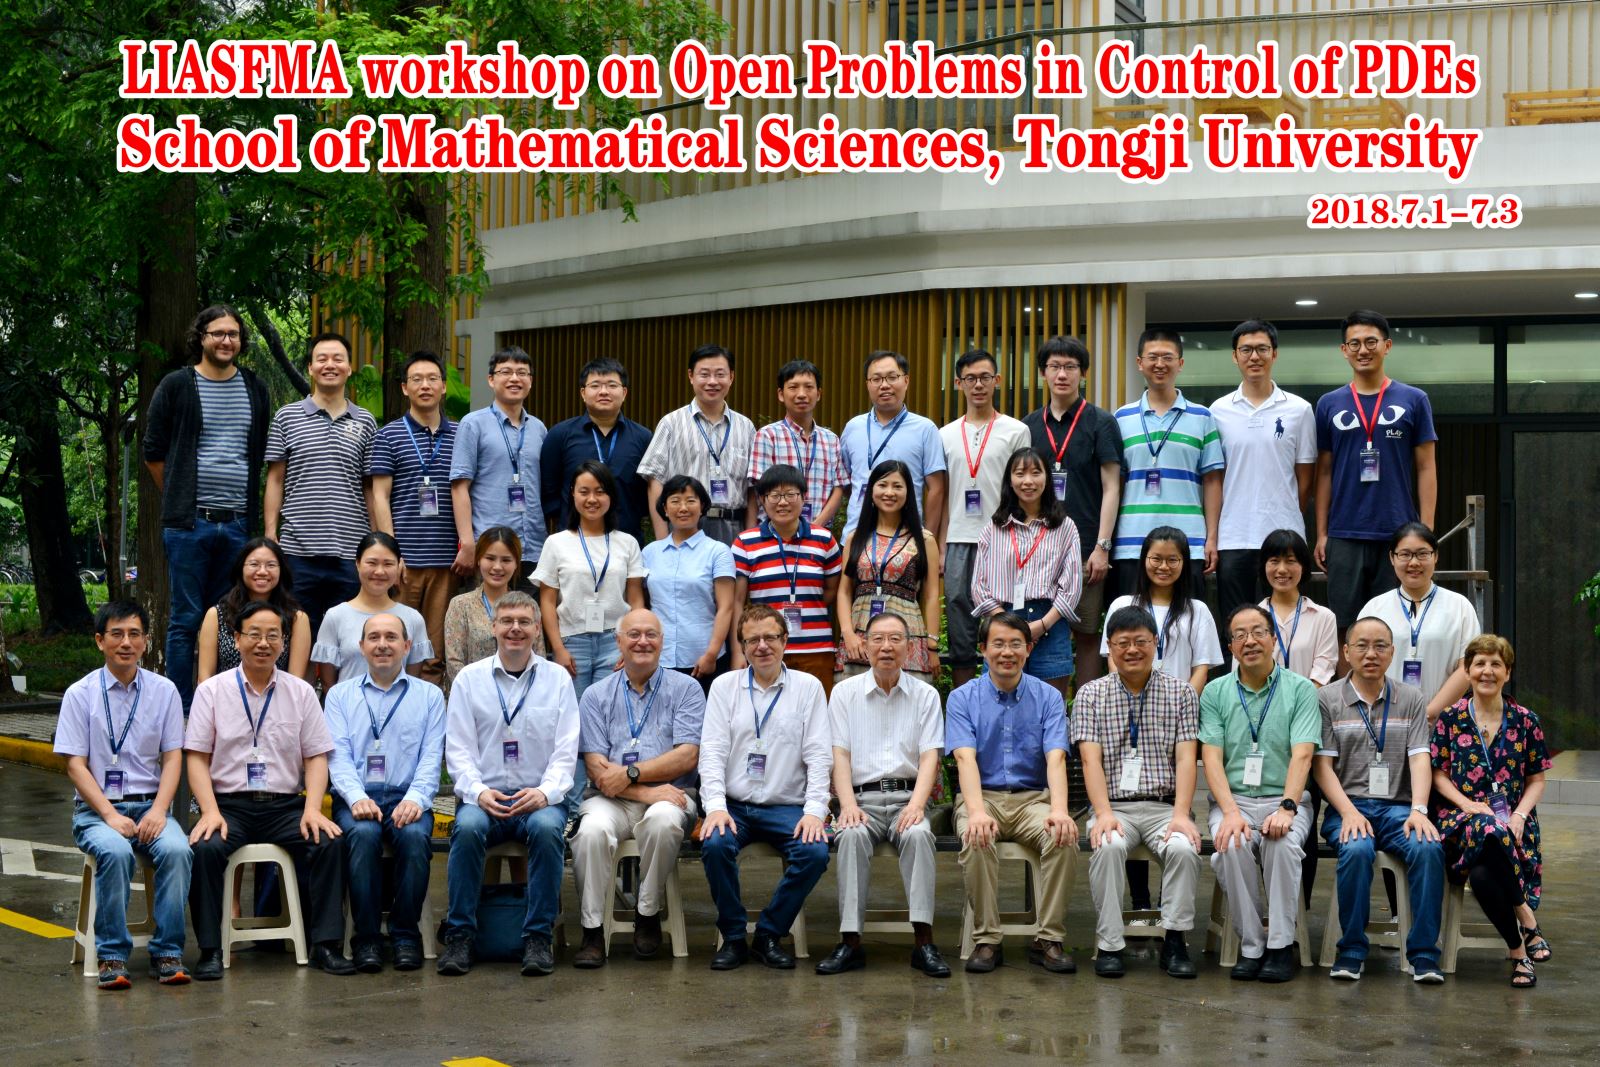 LIASFMA Workshop on Open Problems in Control of PDEs